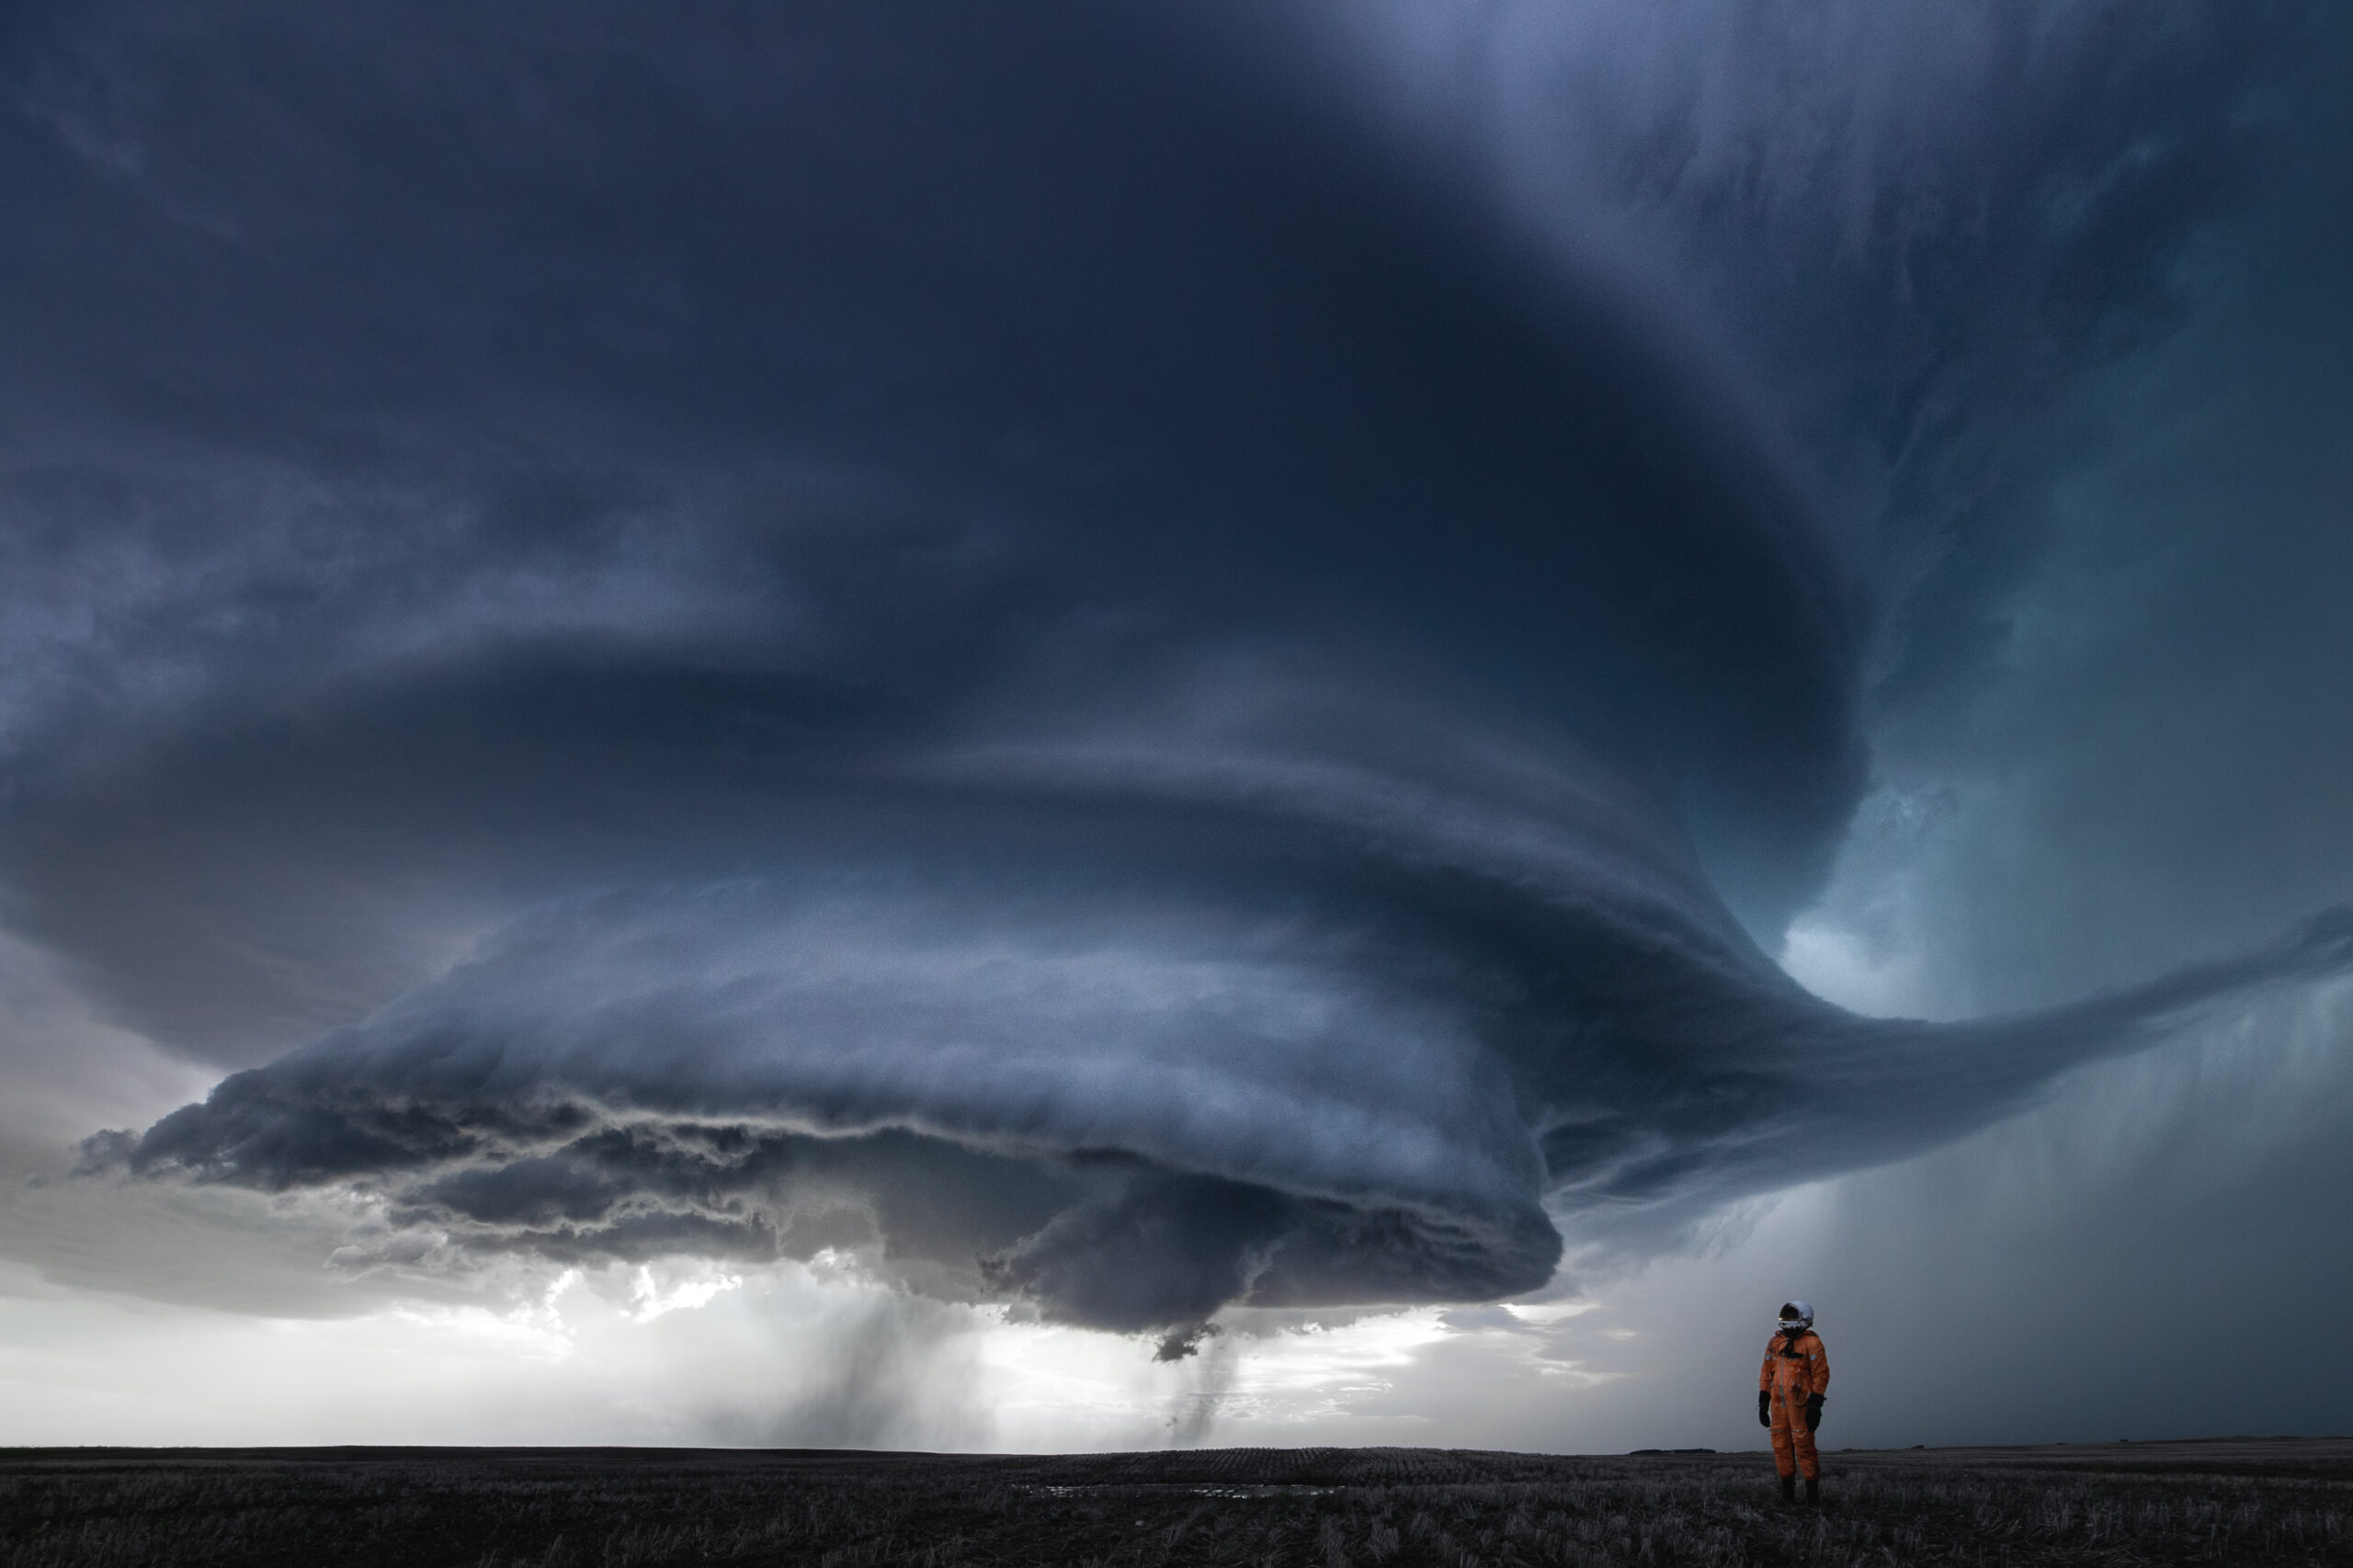 An astronaut stares up at a massive supercell resembling an alien mothership. Photographed in the plains of Saskatchewan, Canada